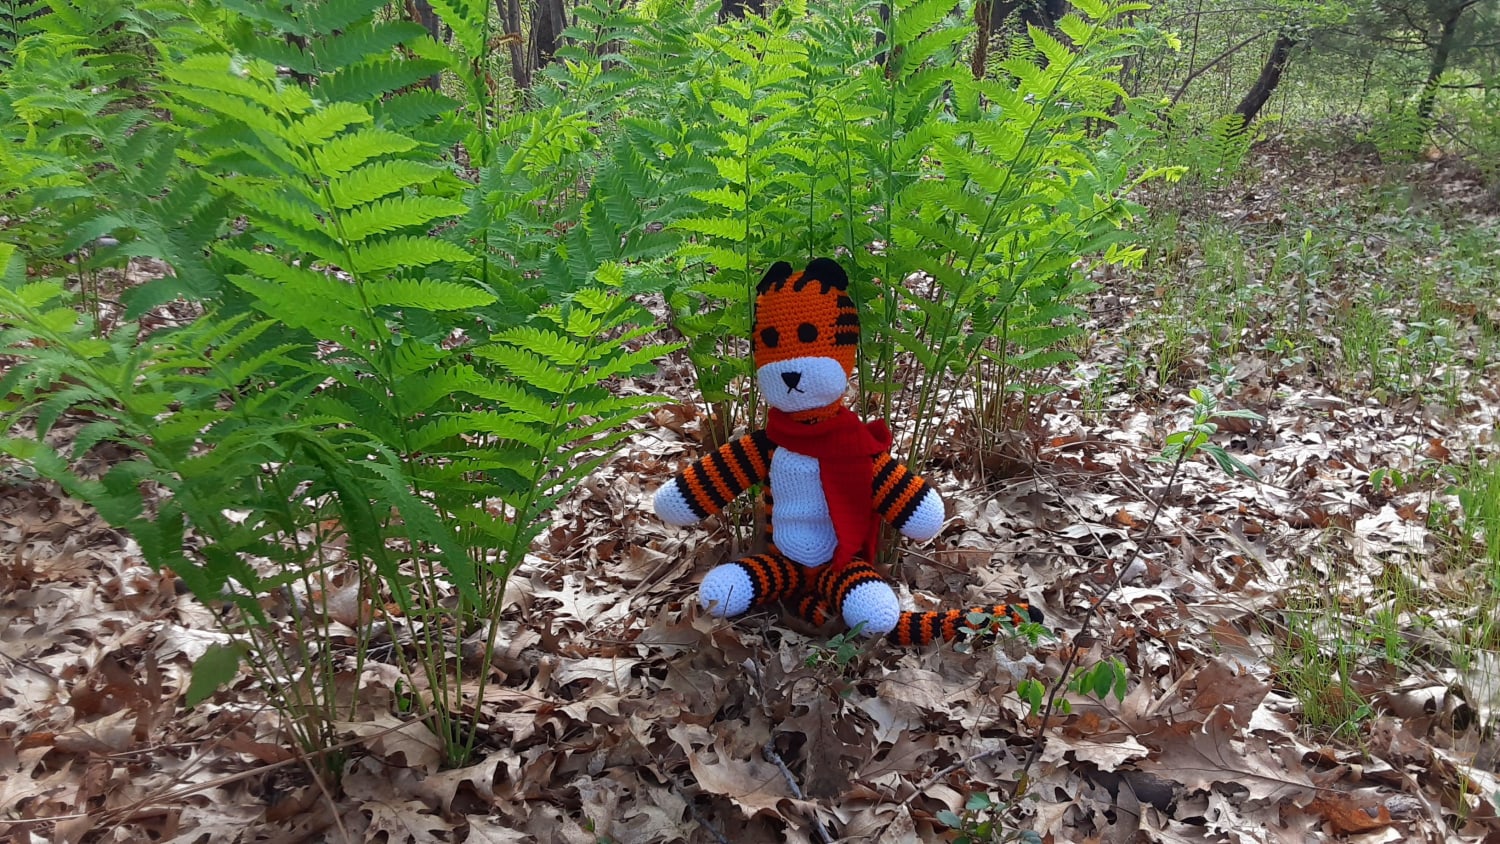 Tiger spotted amongst the ferns today... Rumford, RI